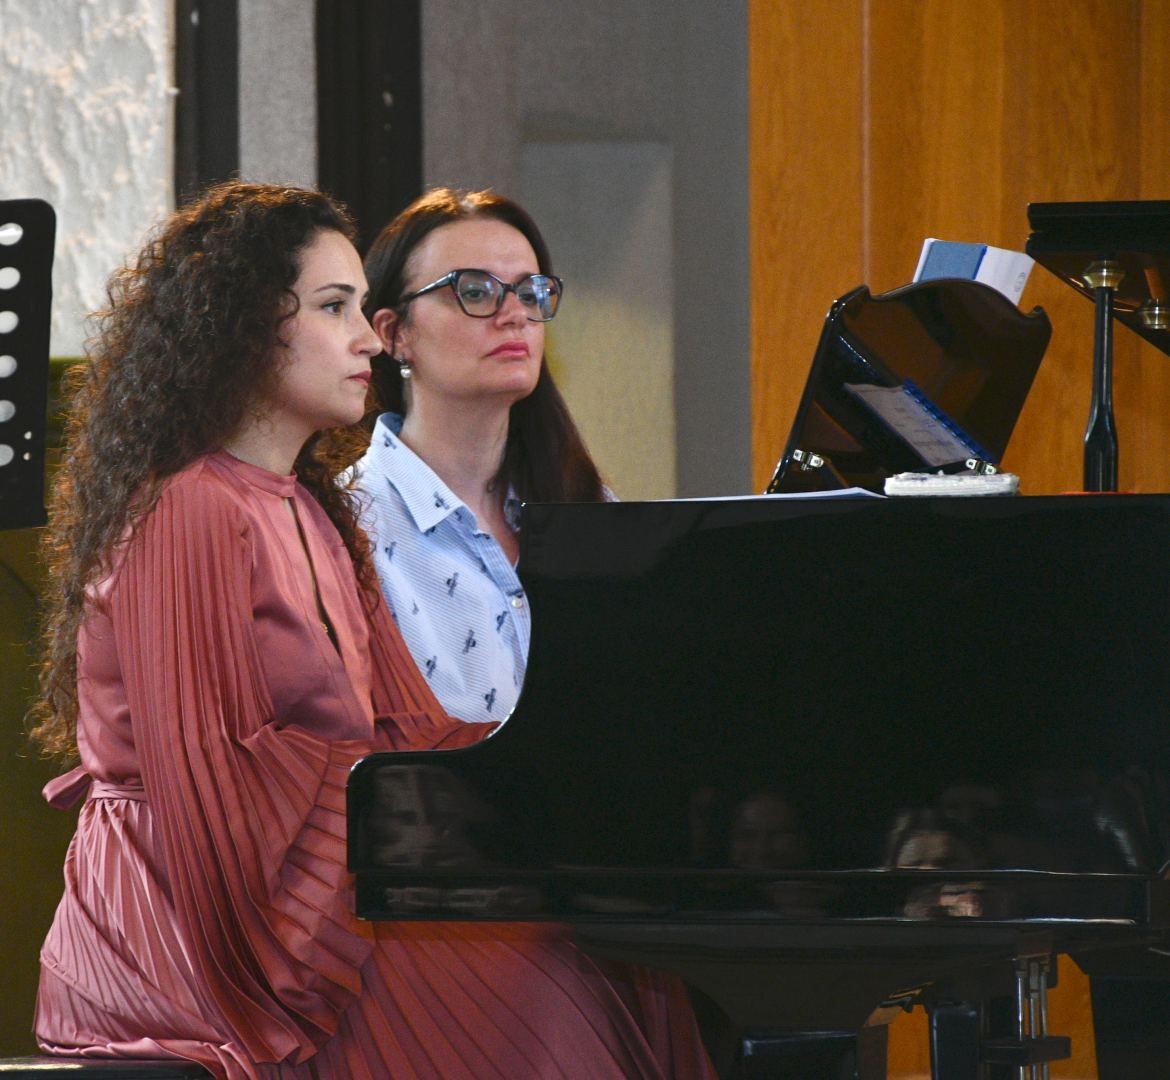 Musical tandem delights listeners with chamber music [PHOTO] - Gallery Image